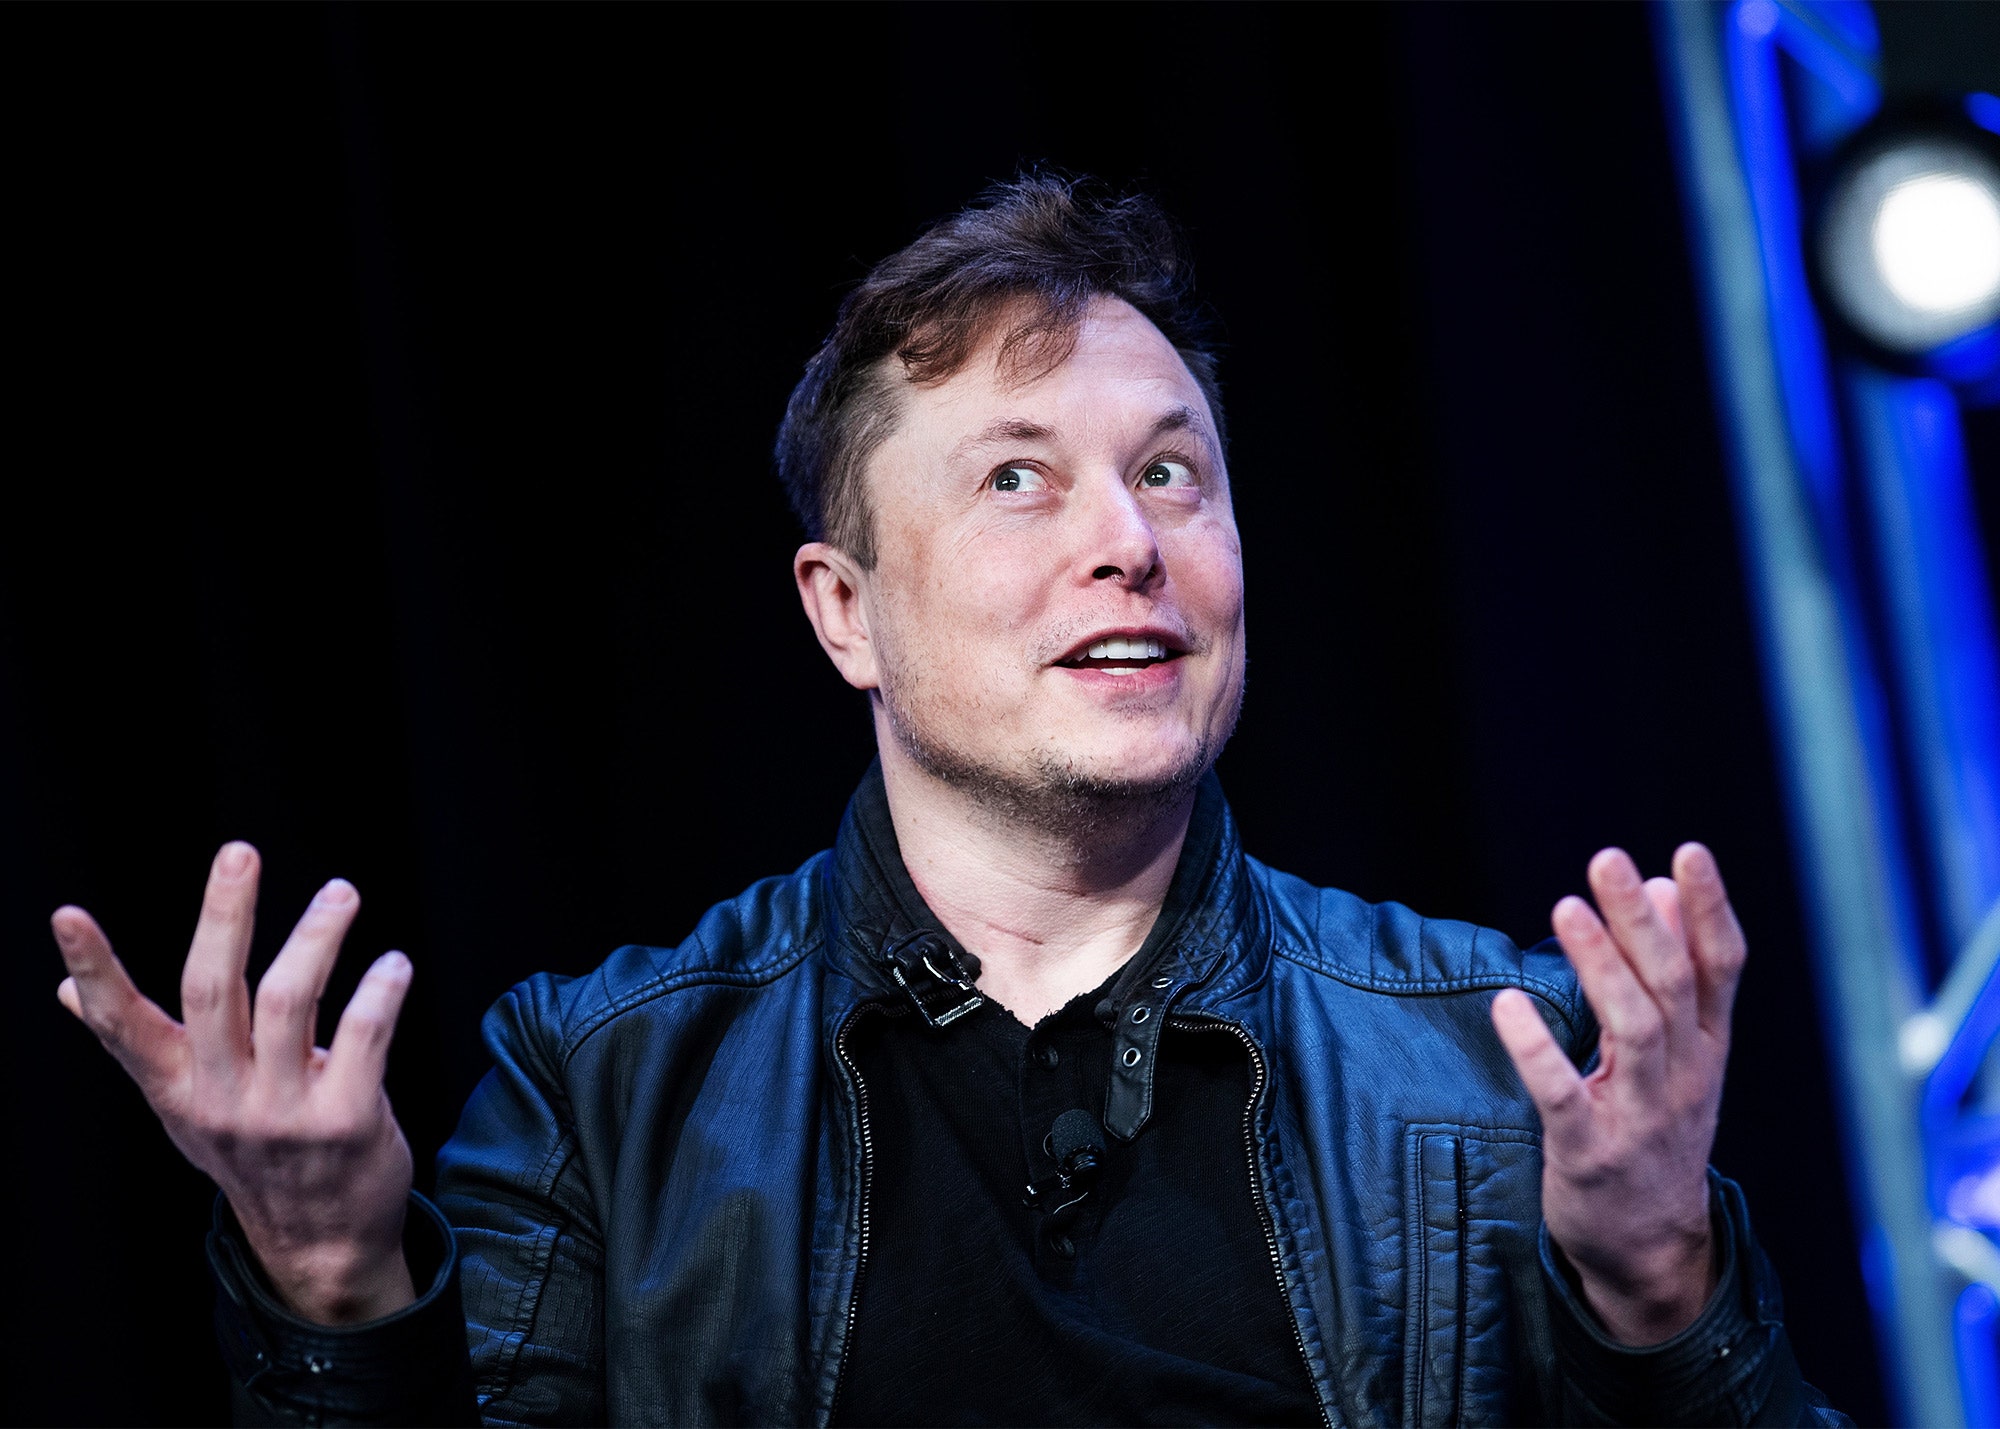 Elon Musk celebrates Tesla’s performance by trolling SEC and short-sellers